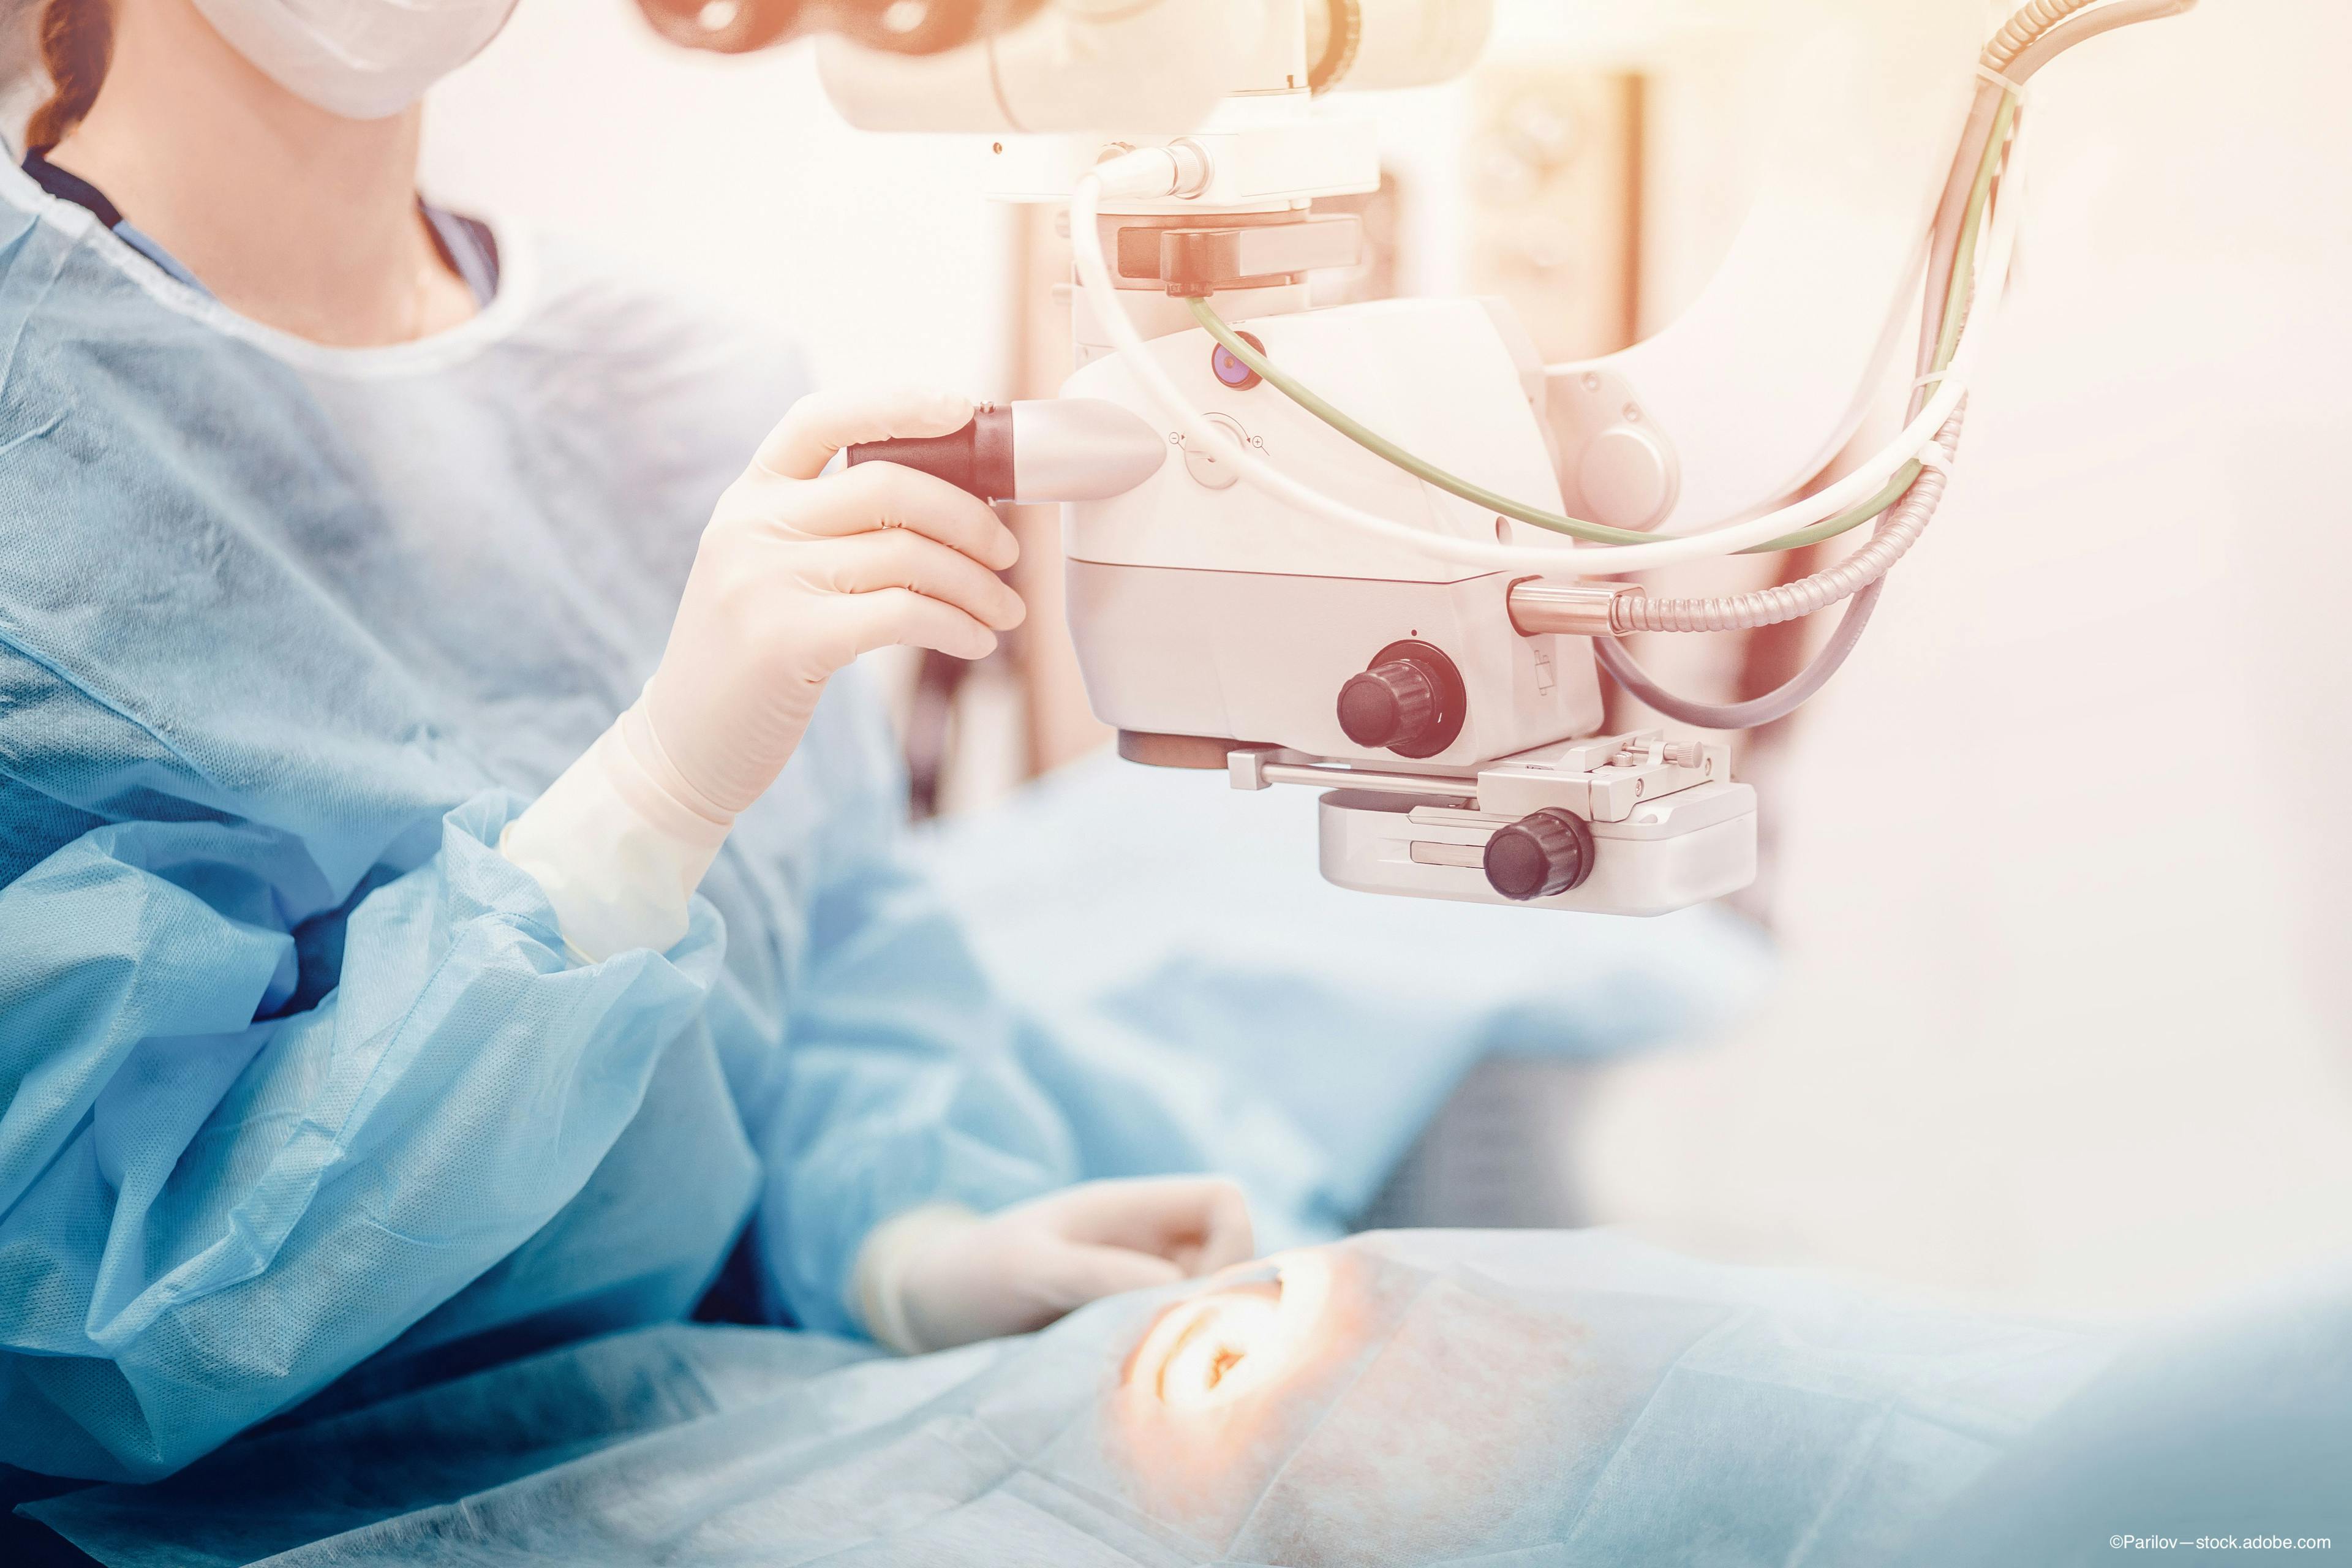 Investigators analyse factors associated with patient satisfaction after refractive surgery